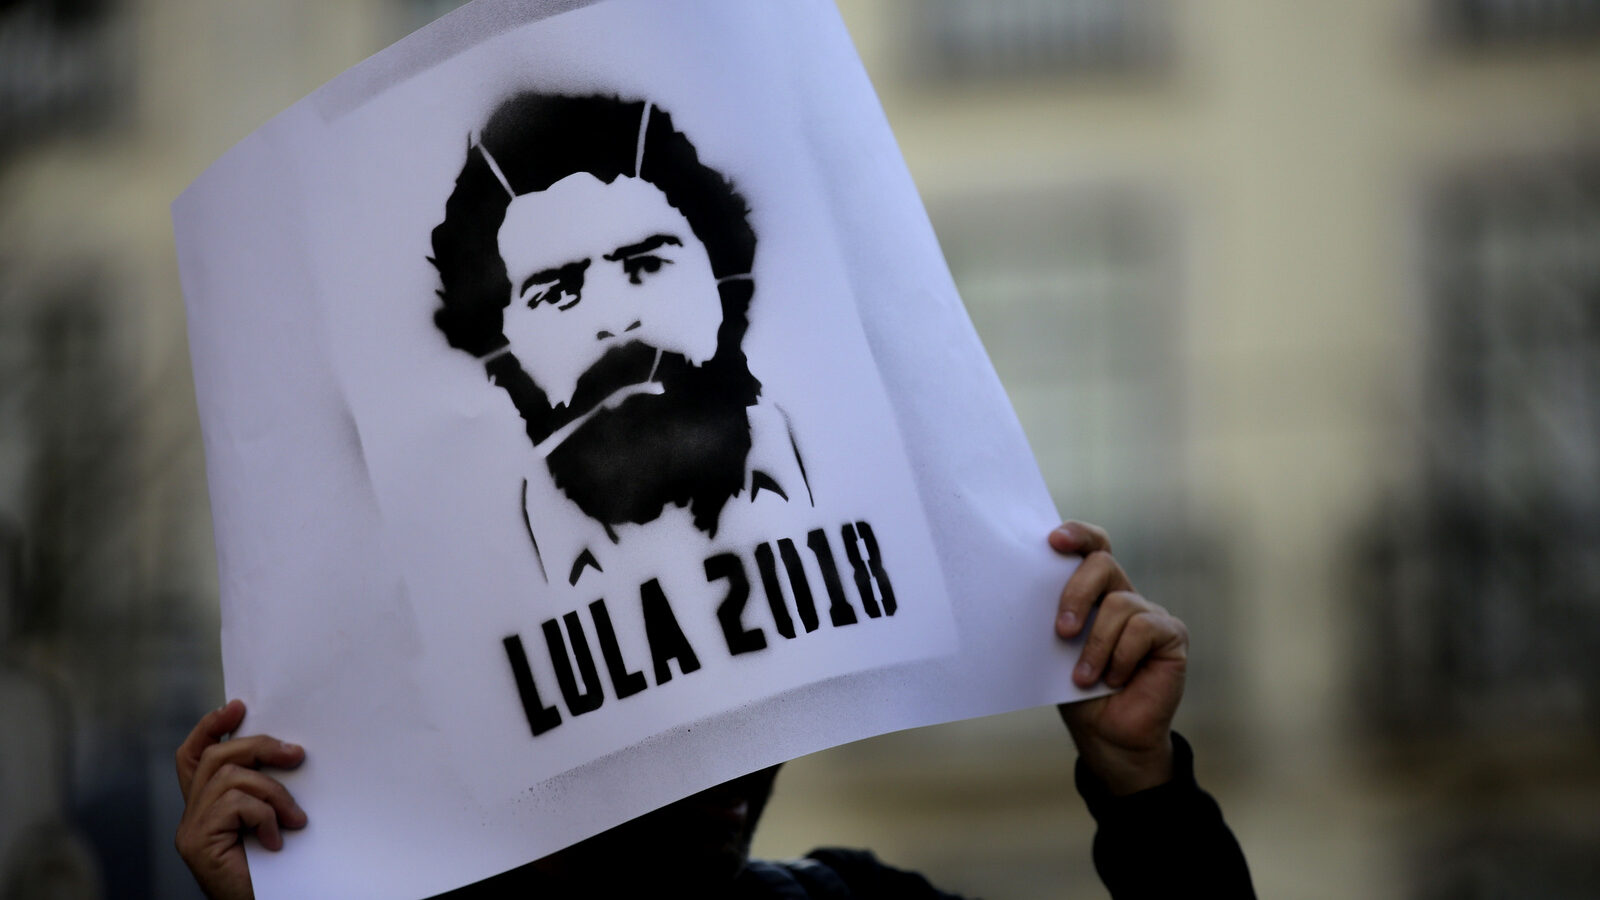 A protestor holds up a poster with a picture of Brazil's former President Luiz Inacio Lula da Silva during a demonstration in his support in Lisbon, Monday, April 9, 2018. Lula da Silva was taken into police custody Saturday, April 7, after the Brazilian Supreme Federal Tribunal ruled against his petition to remain free while he continued to appeal his 12-year sentence for money laundering and corruption. (AP Photo/Armando Franca)